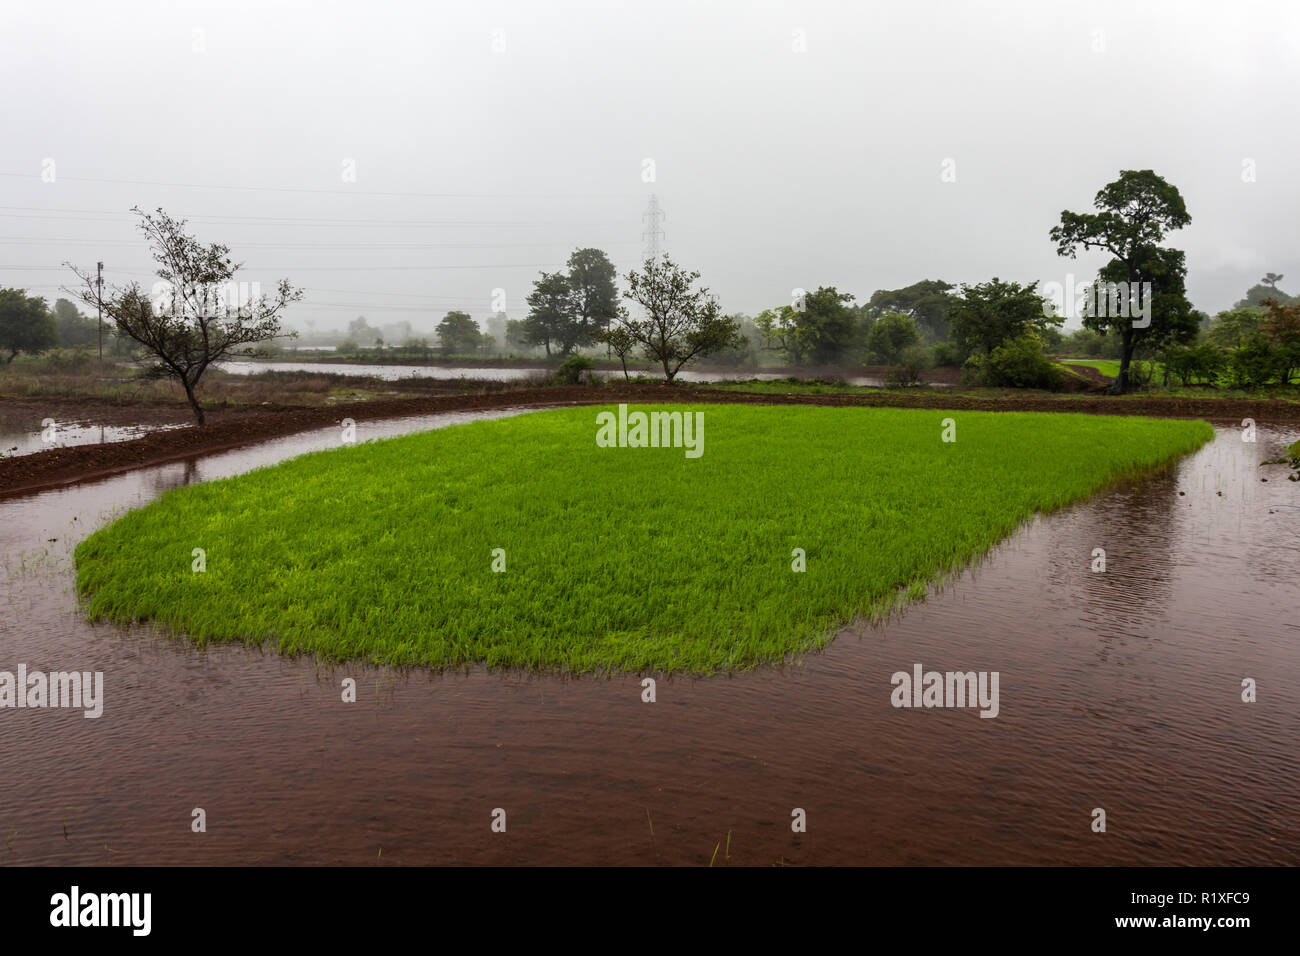 Paddyfield ready for sowing around Tamhini Ghat and Mulshi Dam in western ghats of Pune, Maharashtra, India. Stock Photo